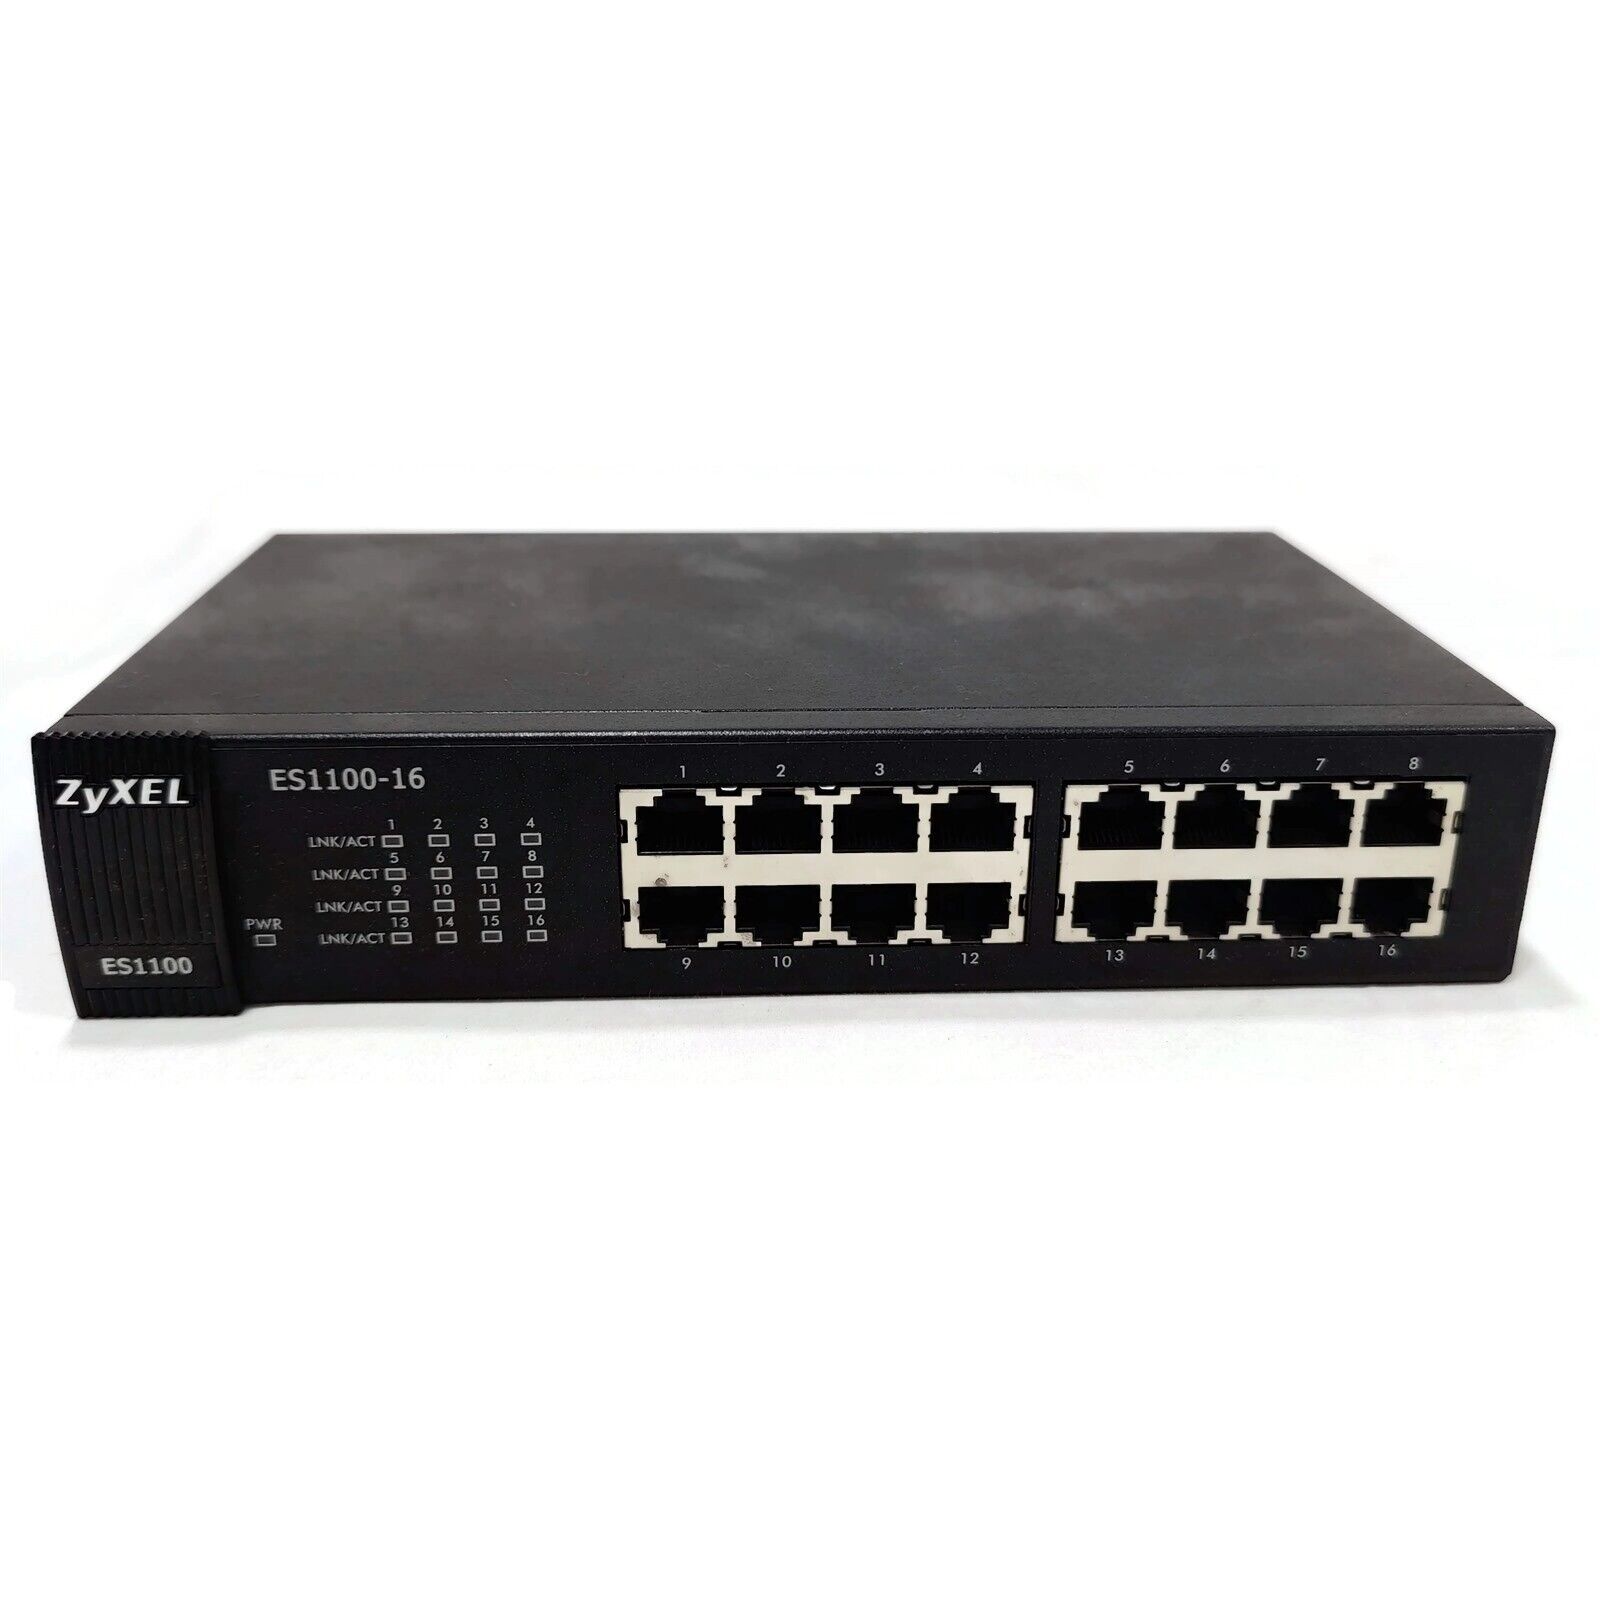 ZyXEL ES-1100-16-16 Port 10/100 unmanaged Switch. Made in China